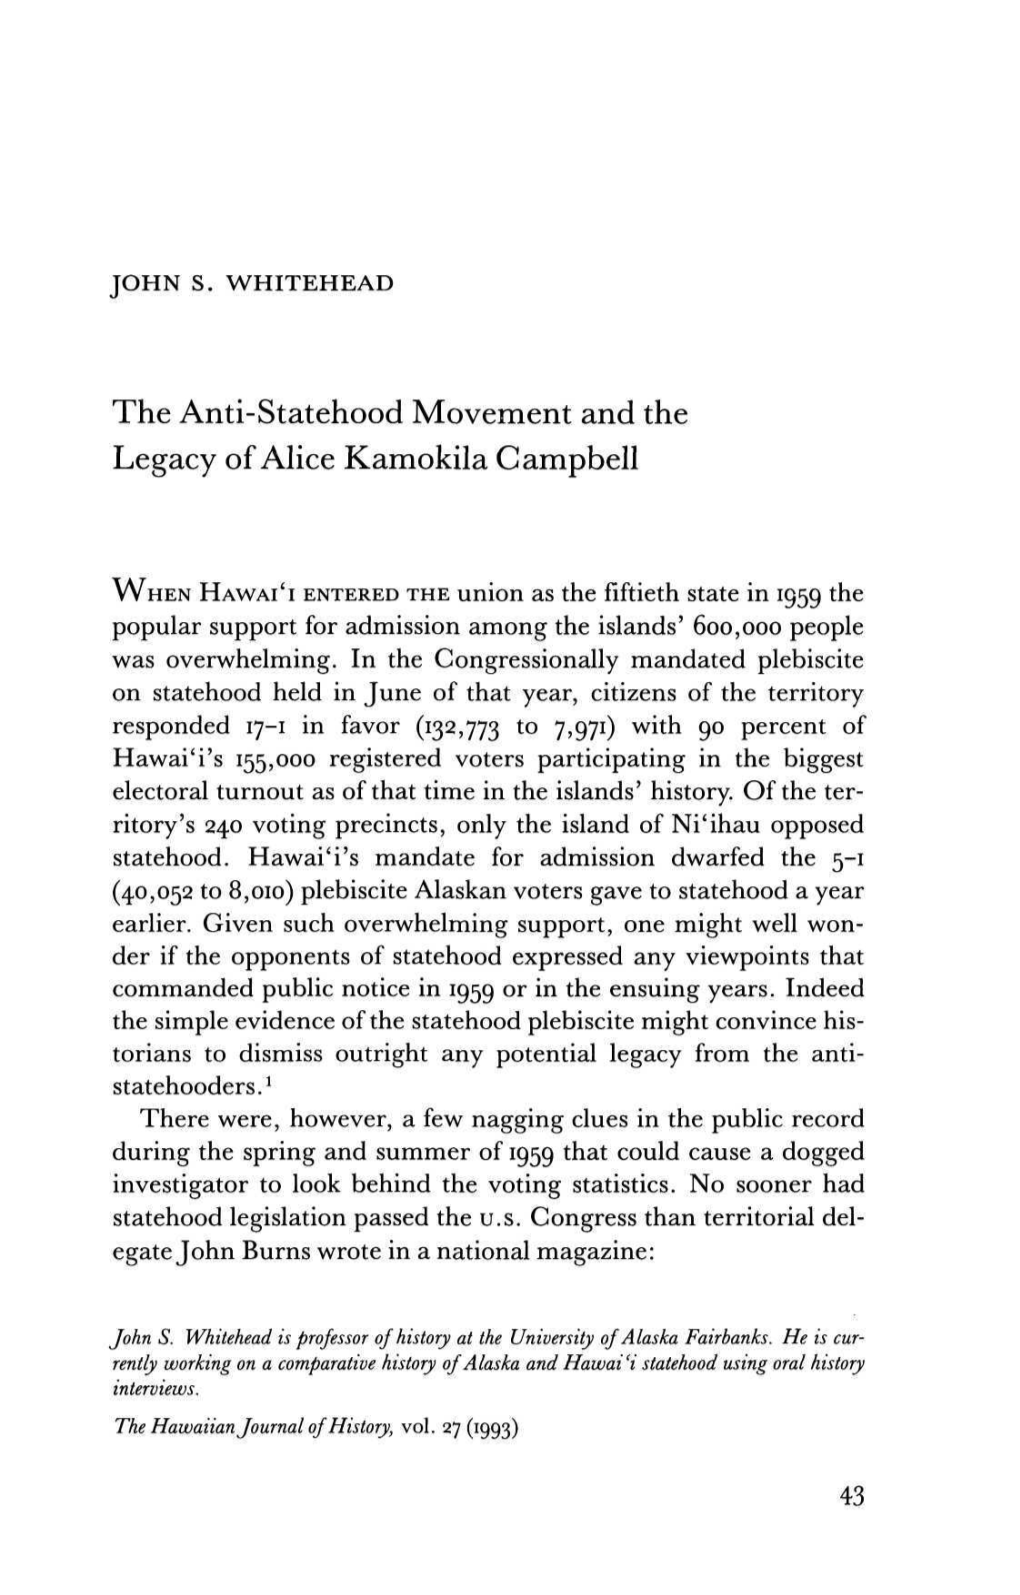 The Anti-Statehood Movement and the Legacy of Alice Kamokila Campbell